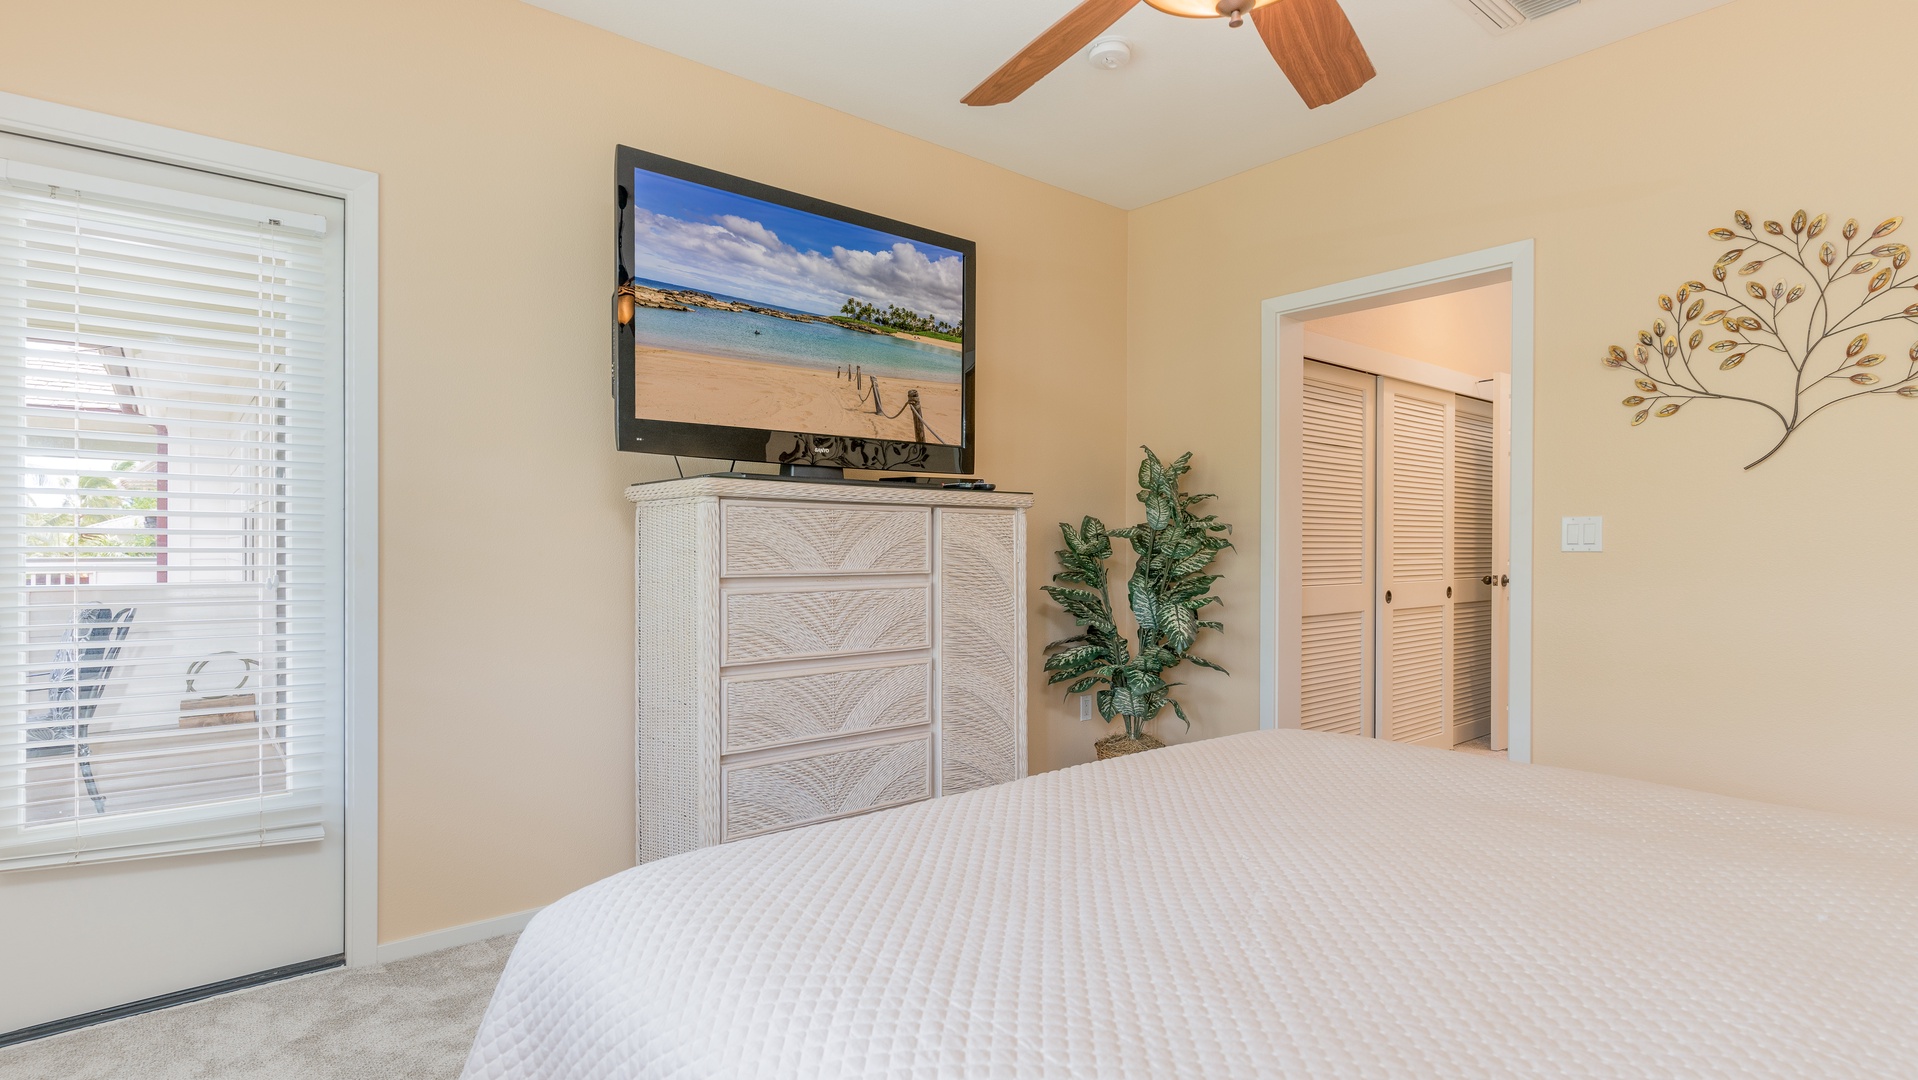 Kapolei Vacation Rentals, Coconut Plantation 1192-4 - Another view of the primary guest bedroom.